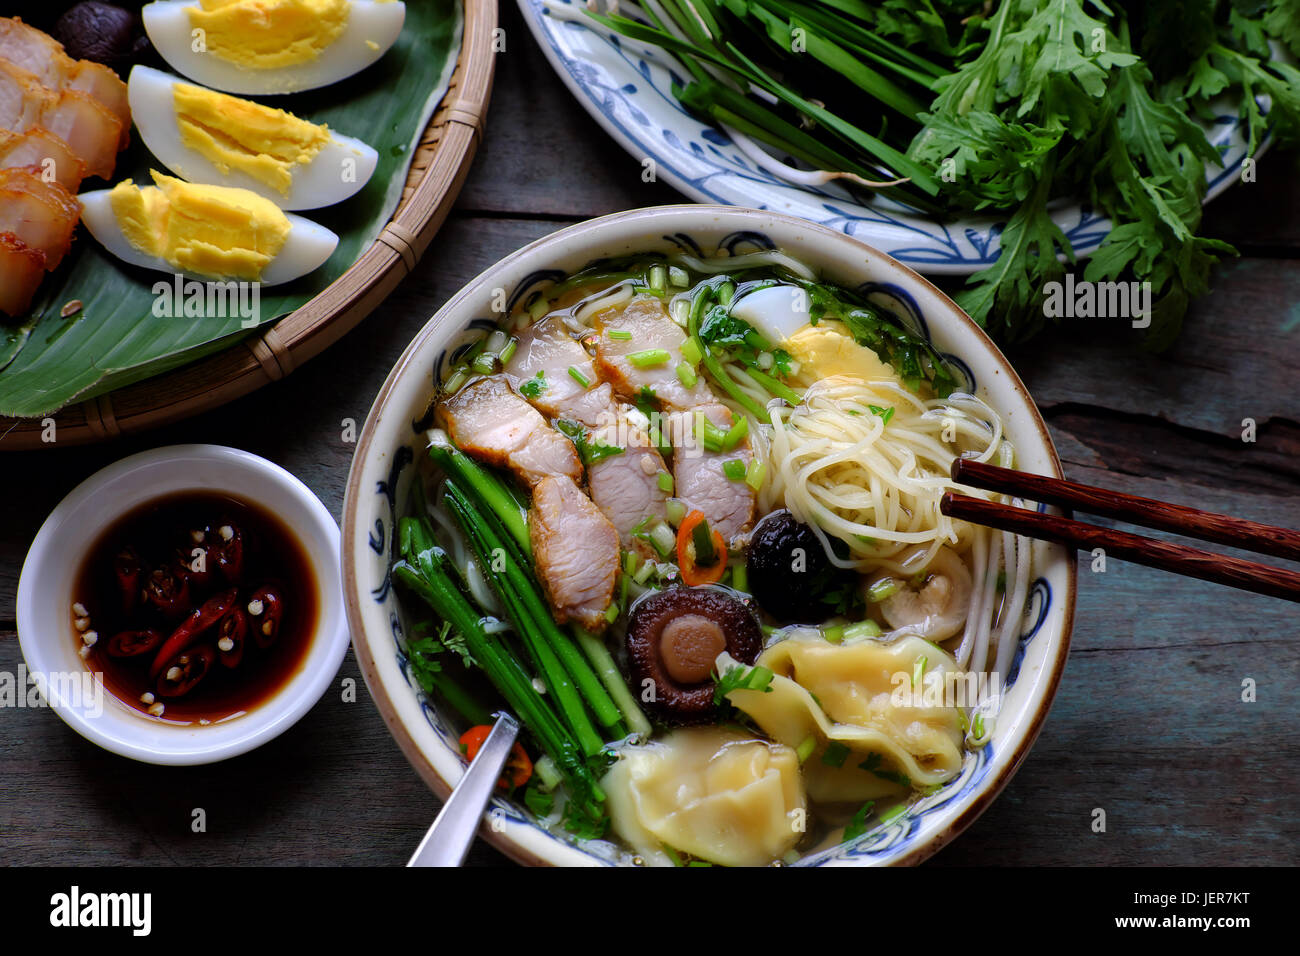 Homemade Vietnam food, egg noodle soup with wontons, colorful food ingredient for this eating as egg, pork, broth, shallot, bean sprout,  vegetable Stock Photo